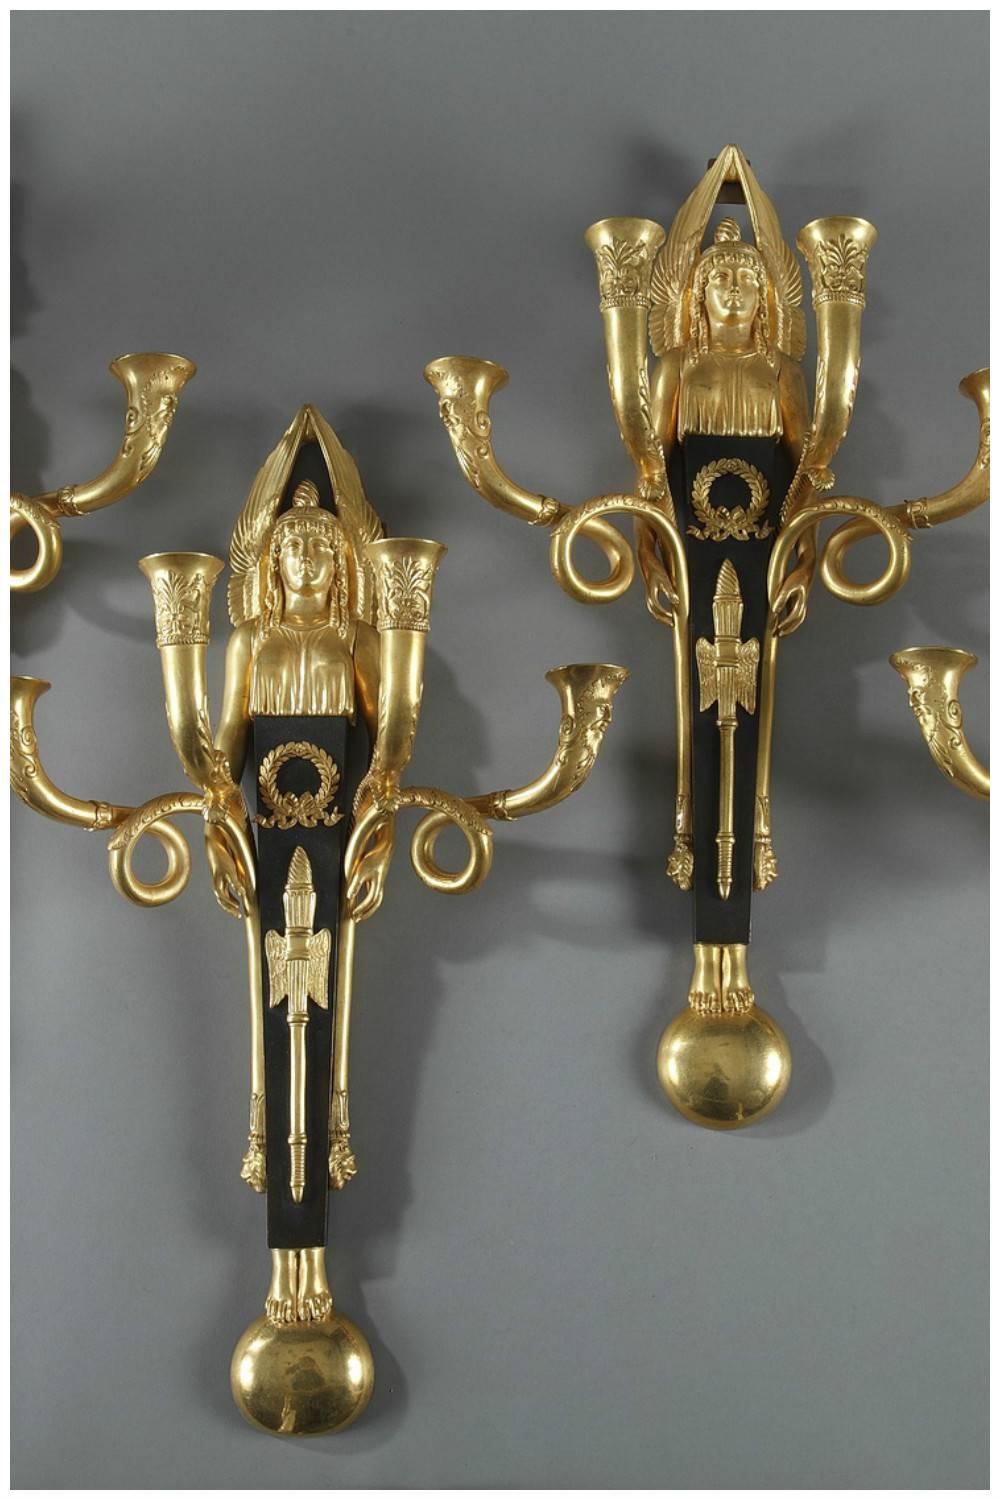 Pair of gilt and patinated bronze sconces from the Empire period, embellished with winged Victories. Each sconce features four candlestick branches that terminate in lions heads and are intricately sculpted with palmettes, griffons, and masks. The